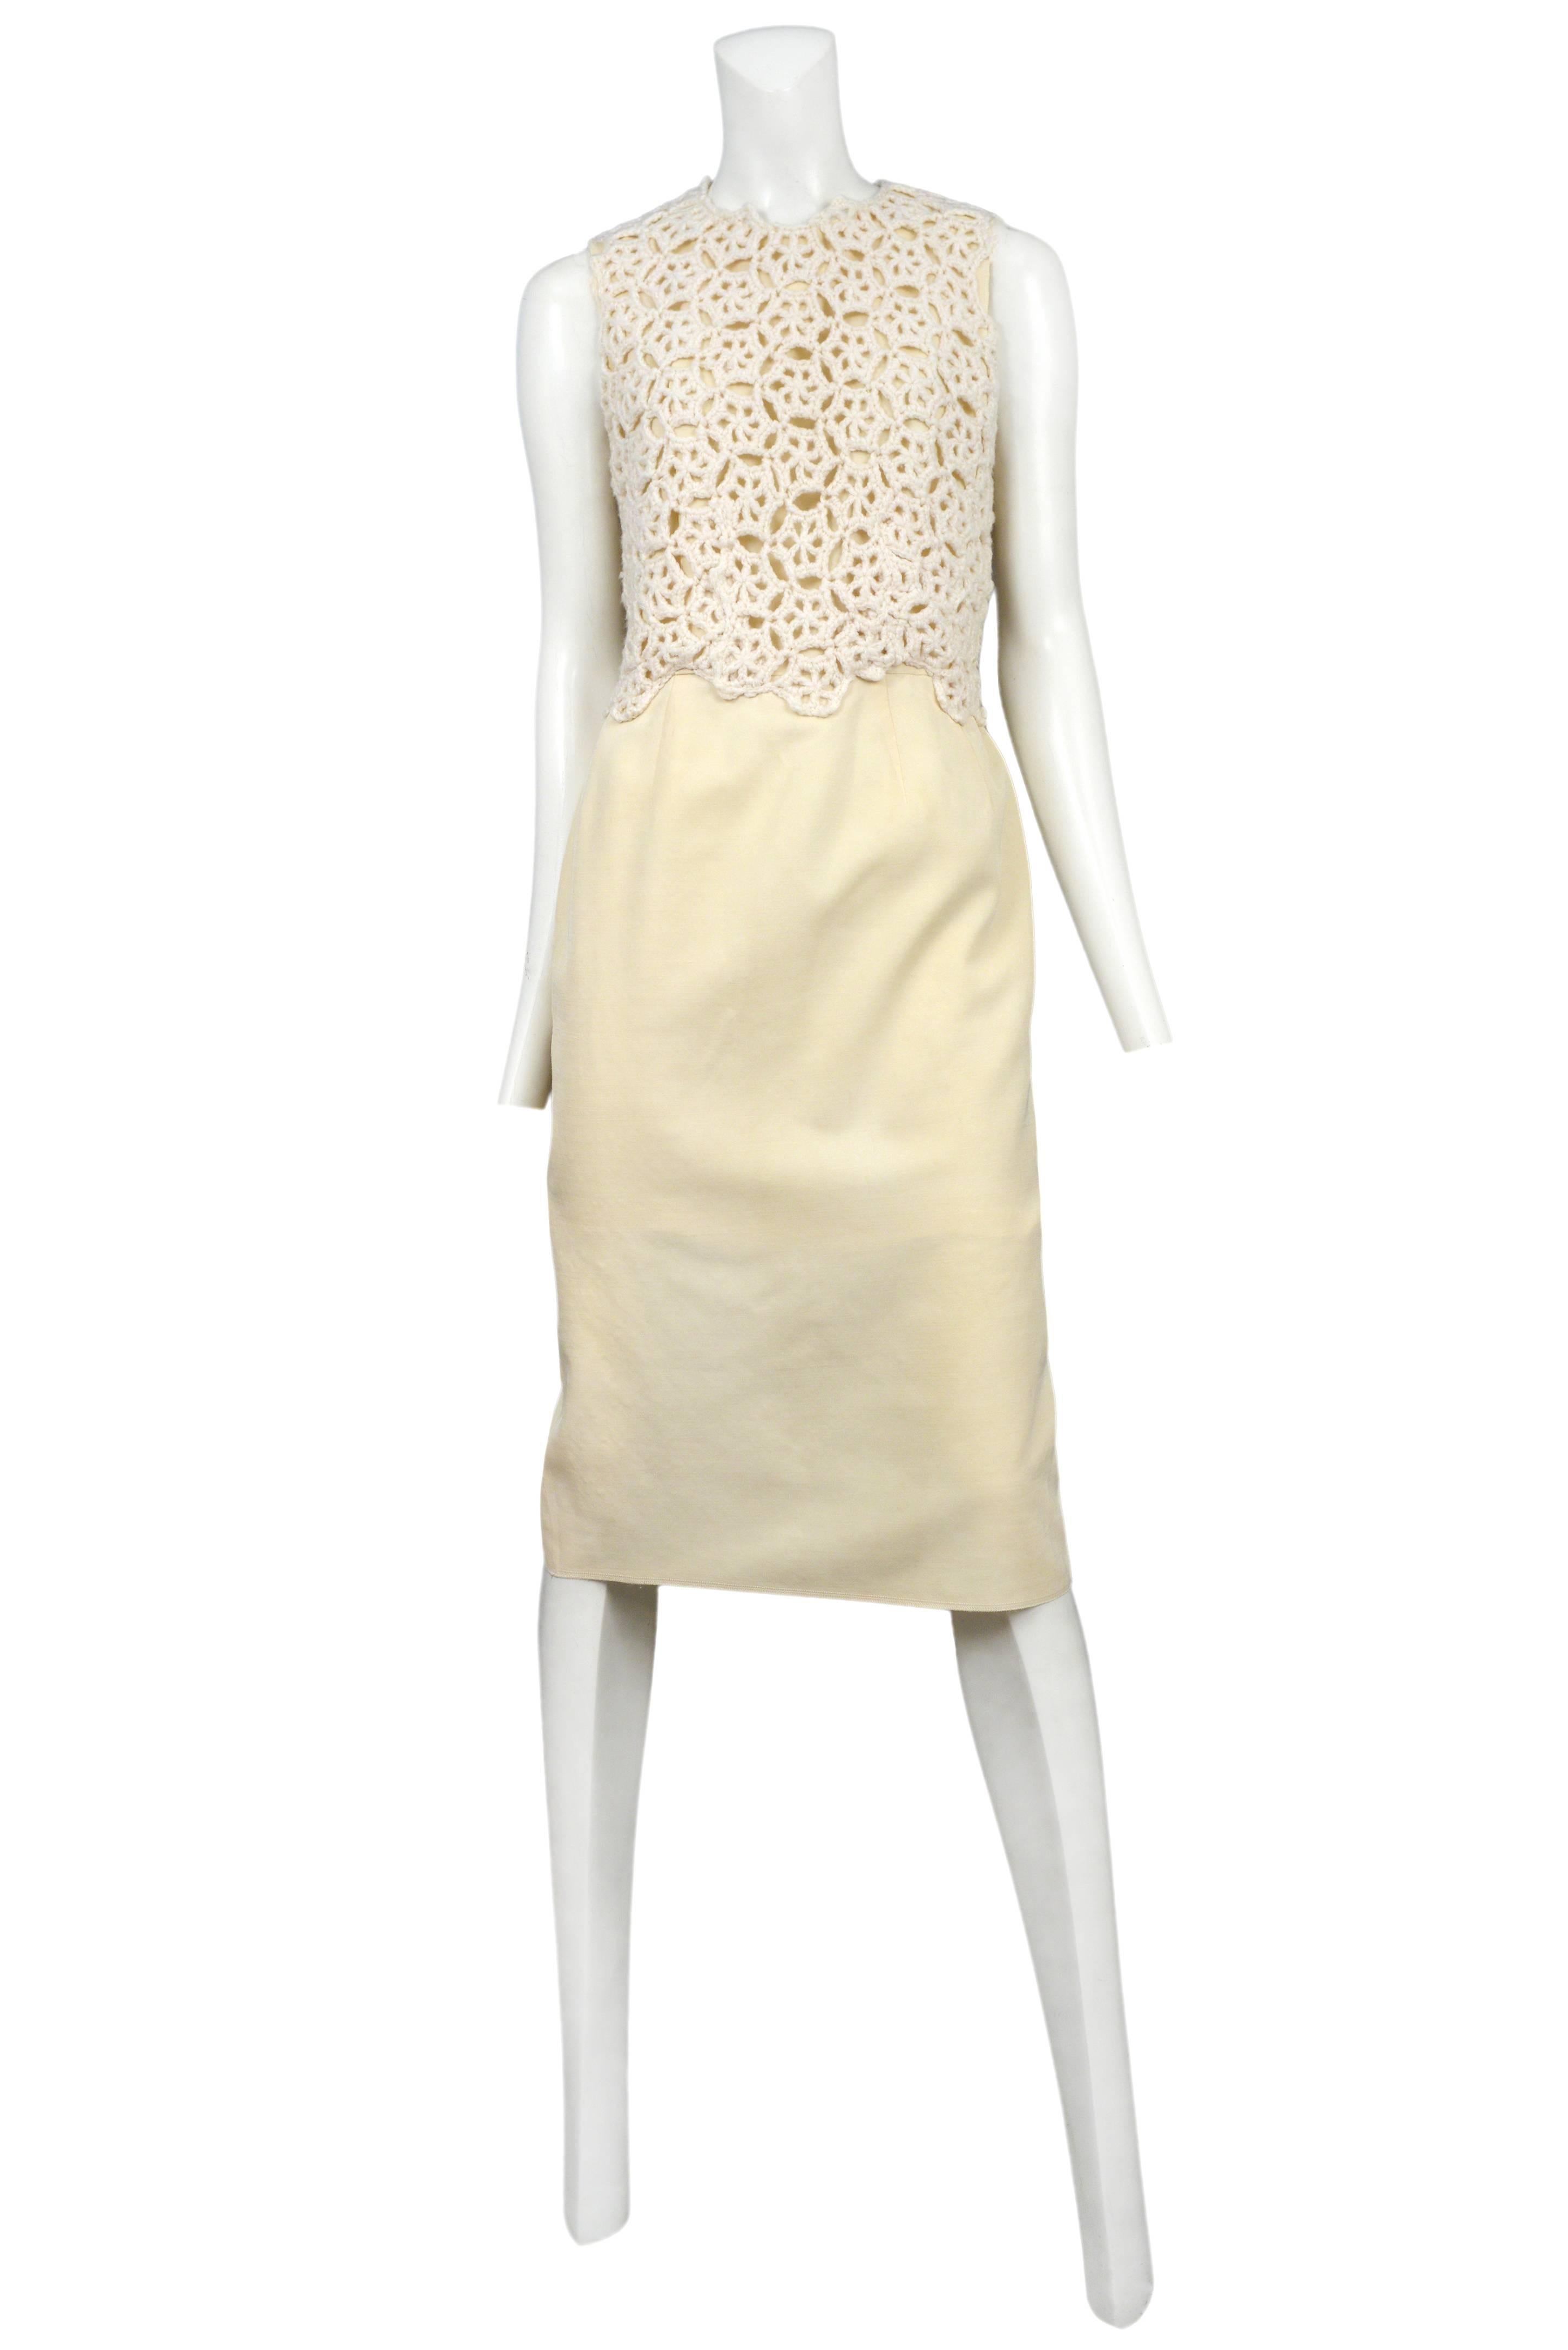 Vintage Comme des Garcons cream sleeveless below the knee pencil dress featuring cream crochet paneling above the waist. Circa 2011.
Please inquire for additional images.